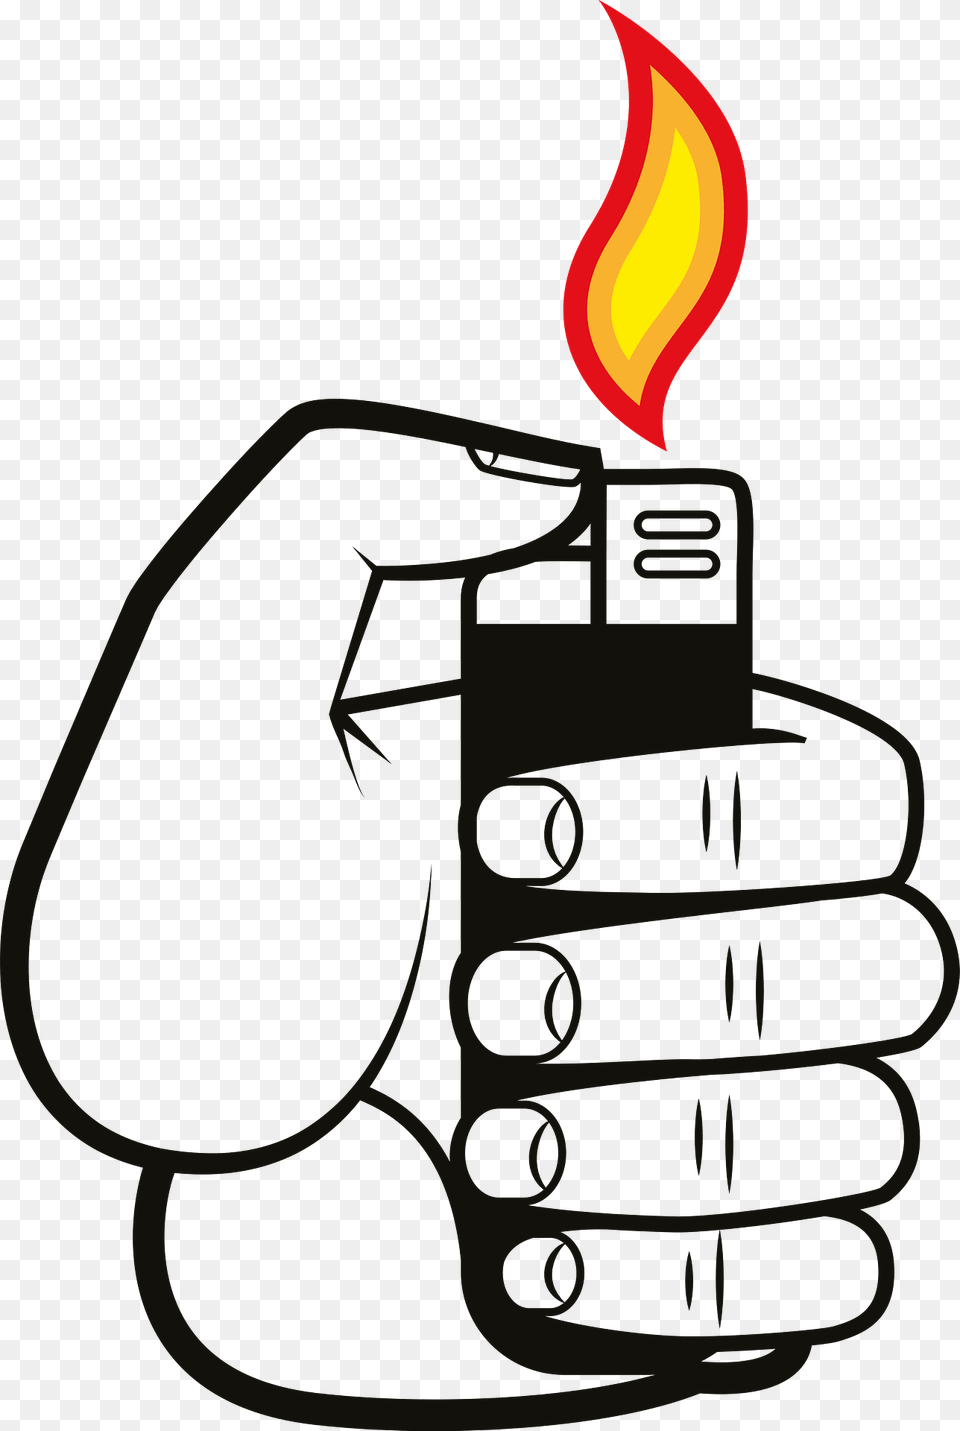 Lighter Flame Clipart, Ammunition, Grenade, Weapon Free Png